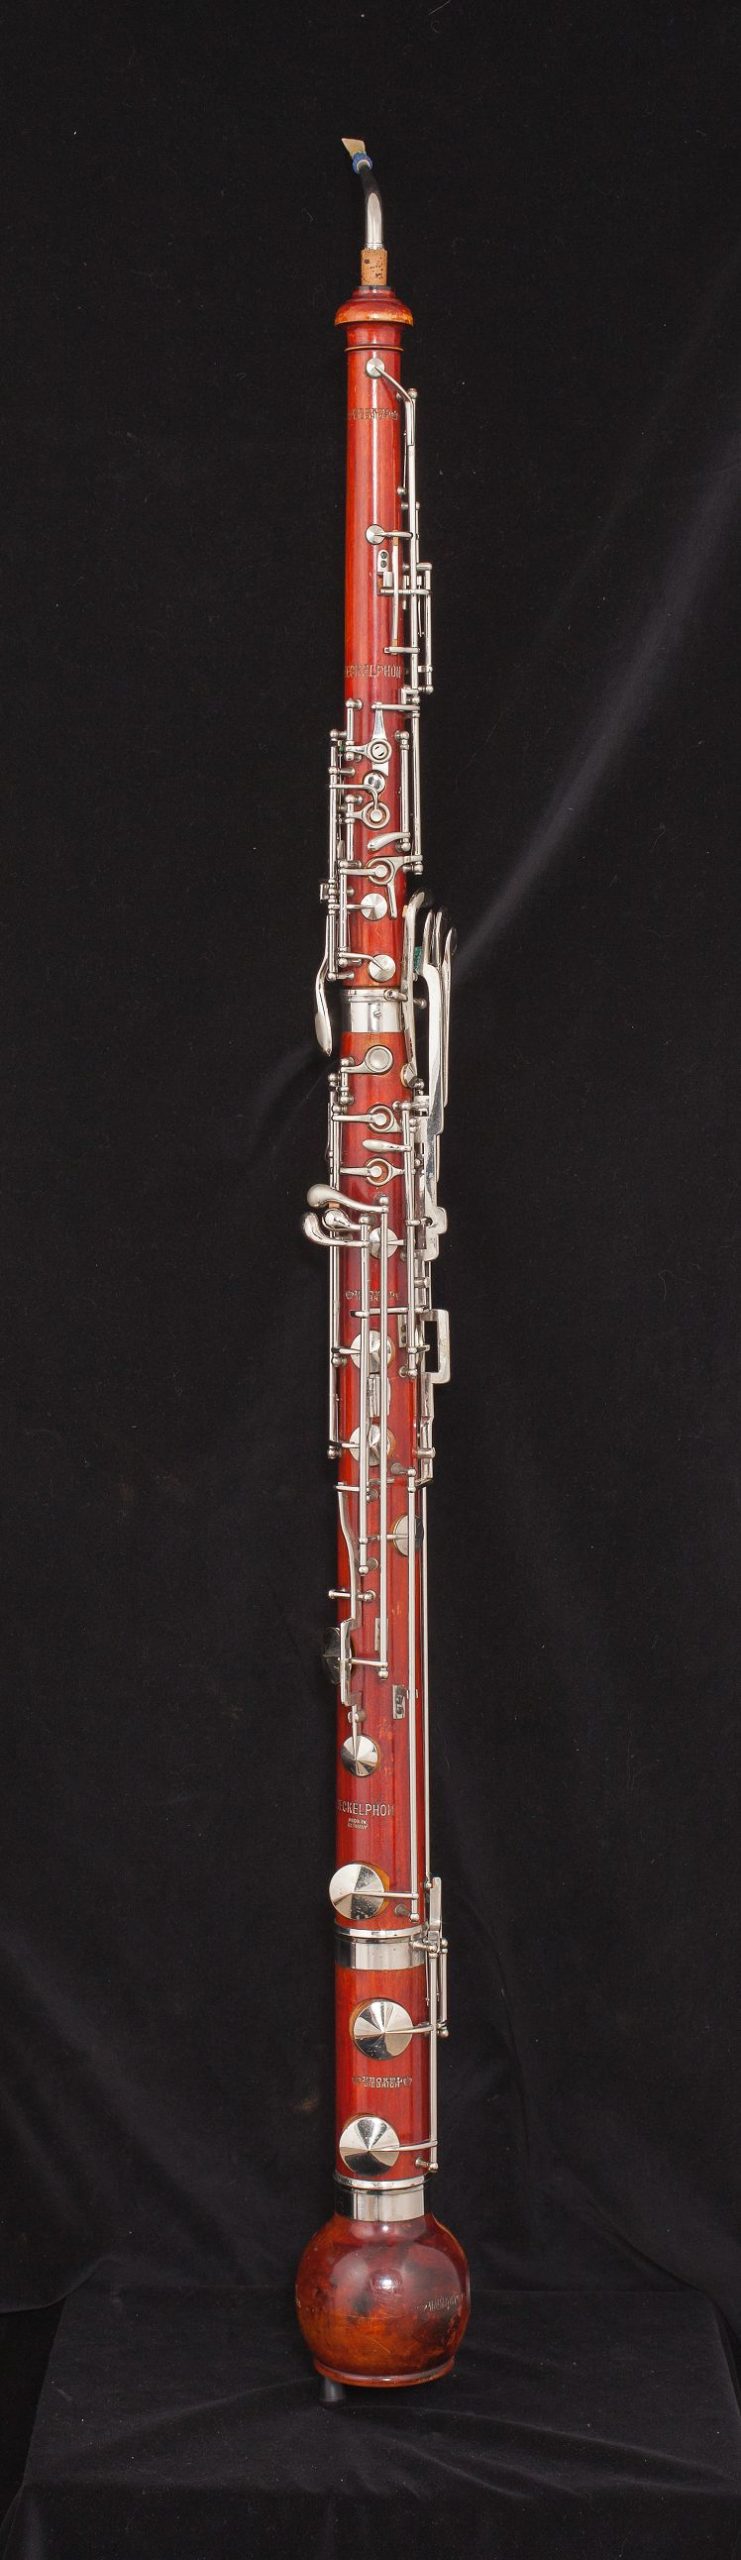 Image of a heckelphone. Double-reed instrument made of a reddish wood with metal keys.